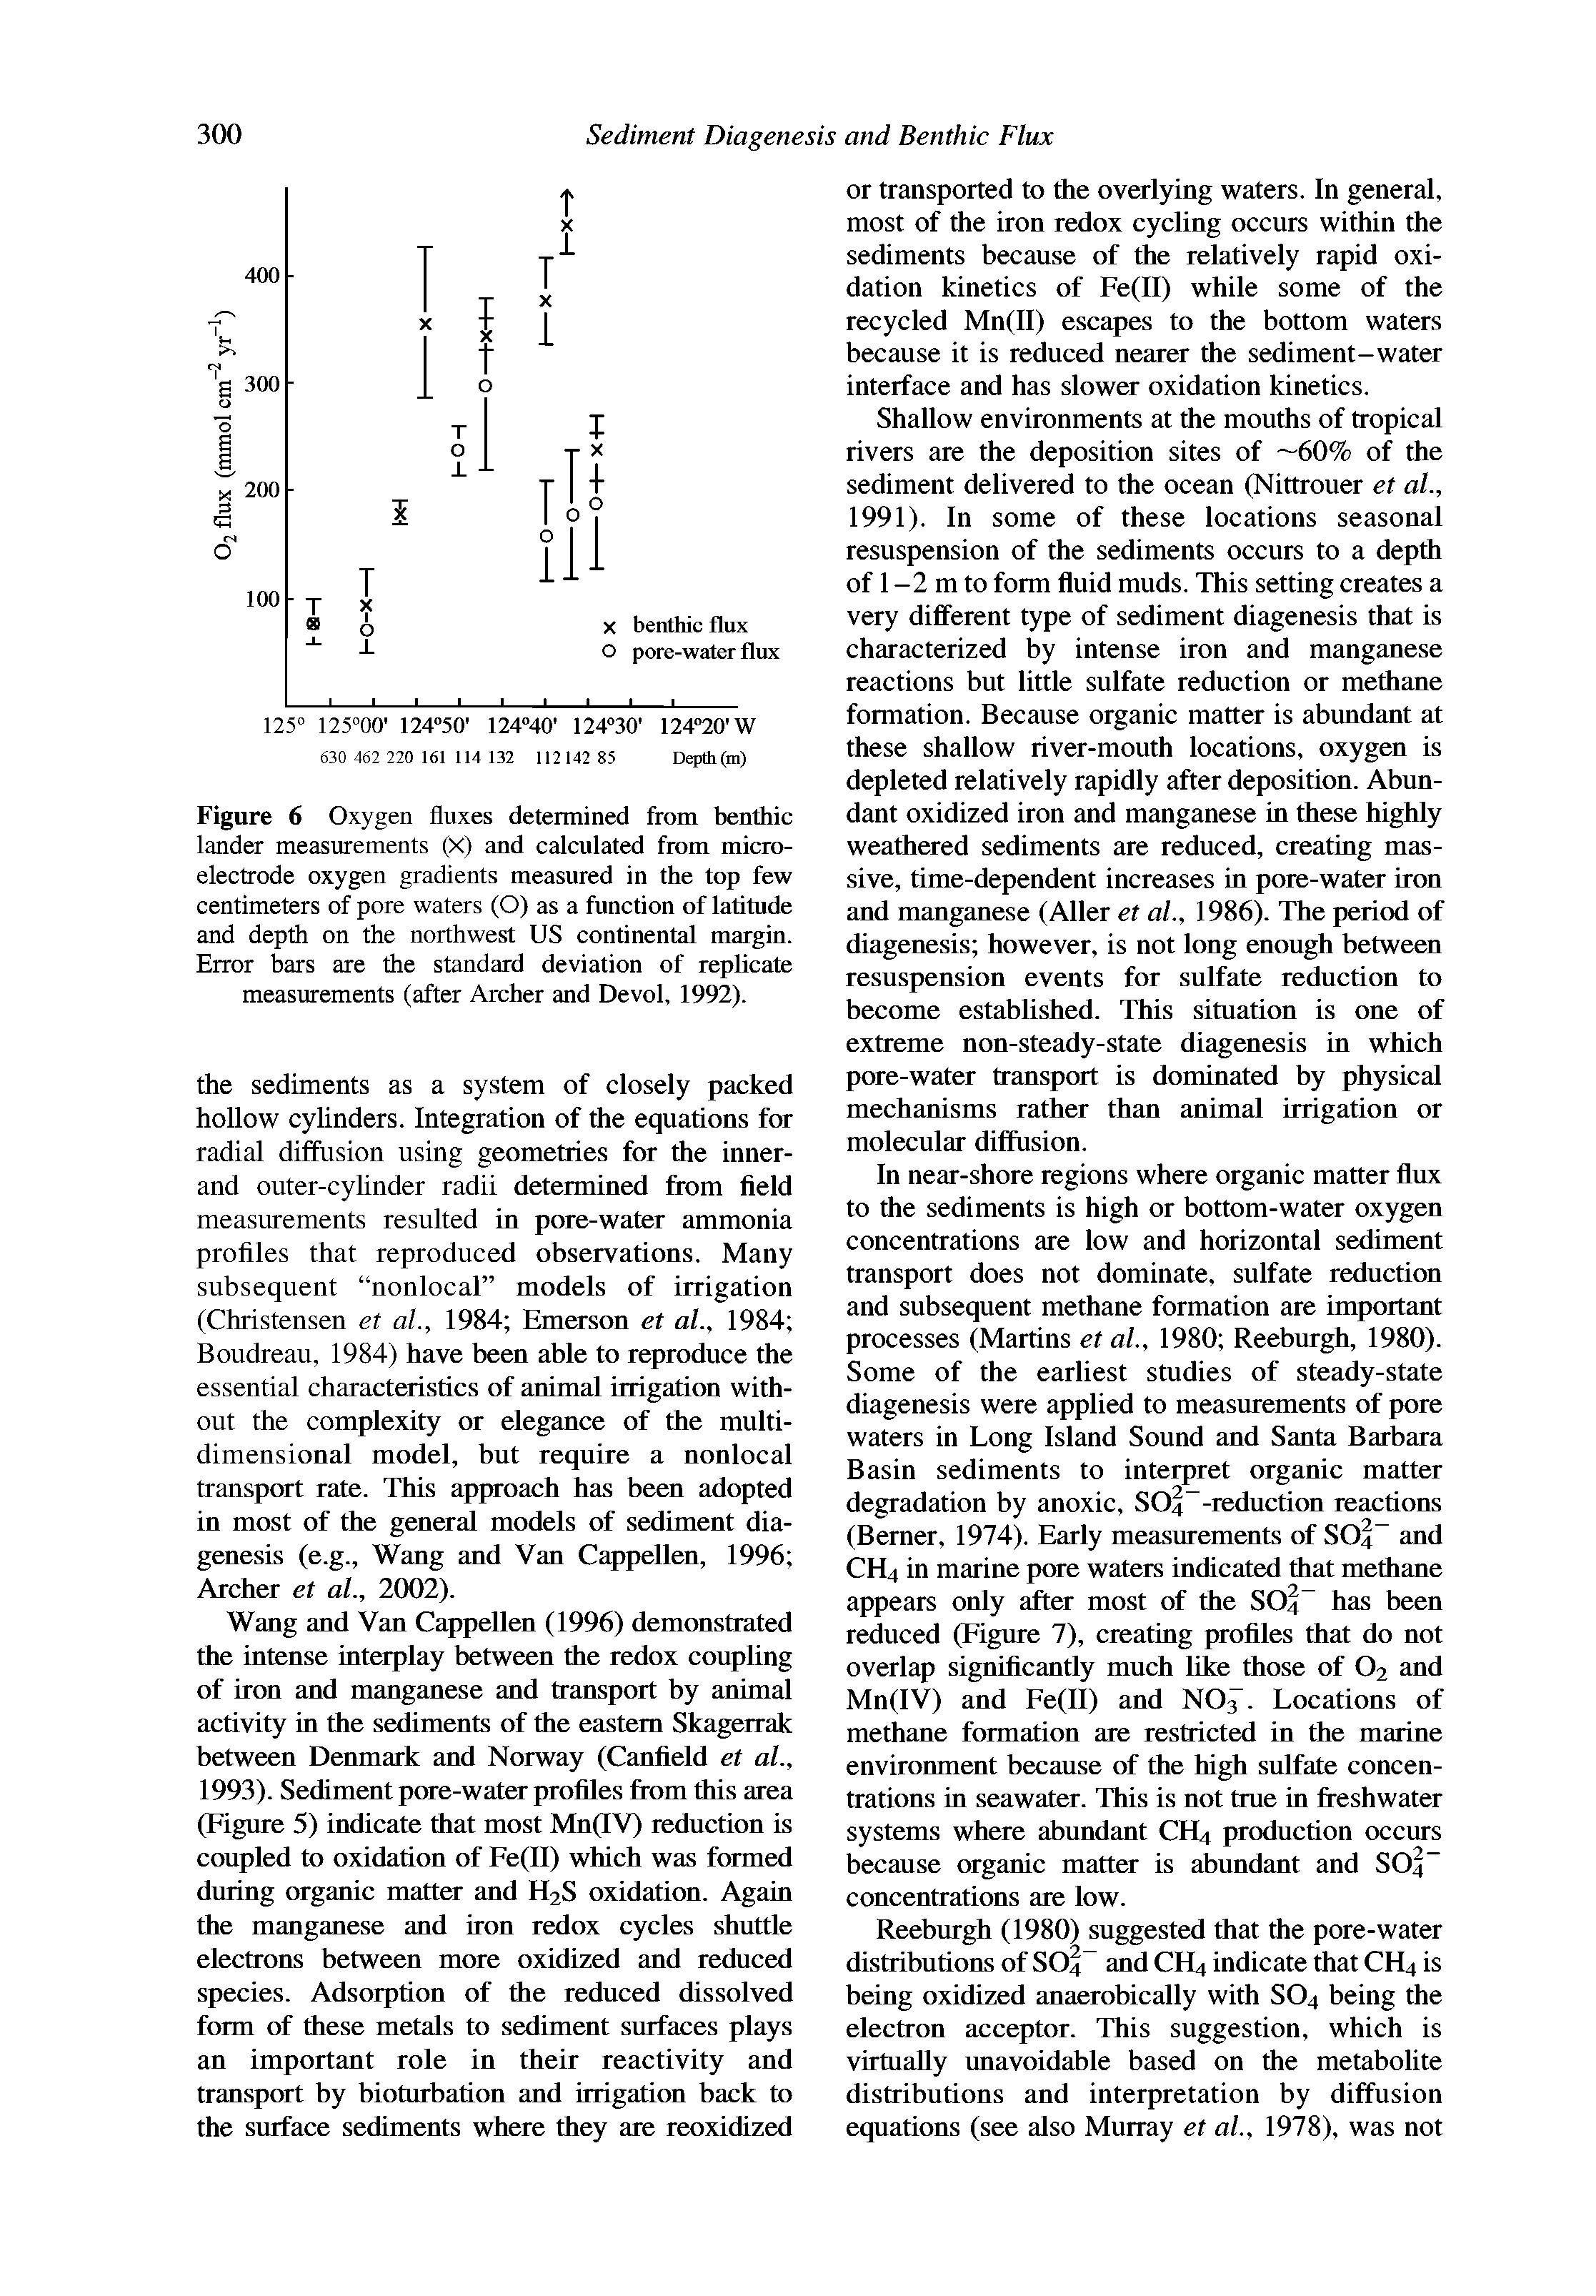 Figure 6 Oxygen fluxes determined from benthic lander measurements (X) and calculated from microelectrode oxygen gradients measured in the top few centimeters of pore waters (O) as a function of latitude and depth on the northwest US continental margin. Error bars are the standard deviation of replicate measurements (after Archer and Devol, 1992).